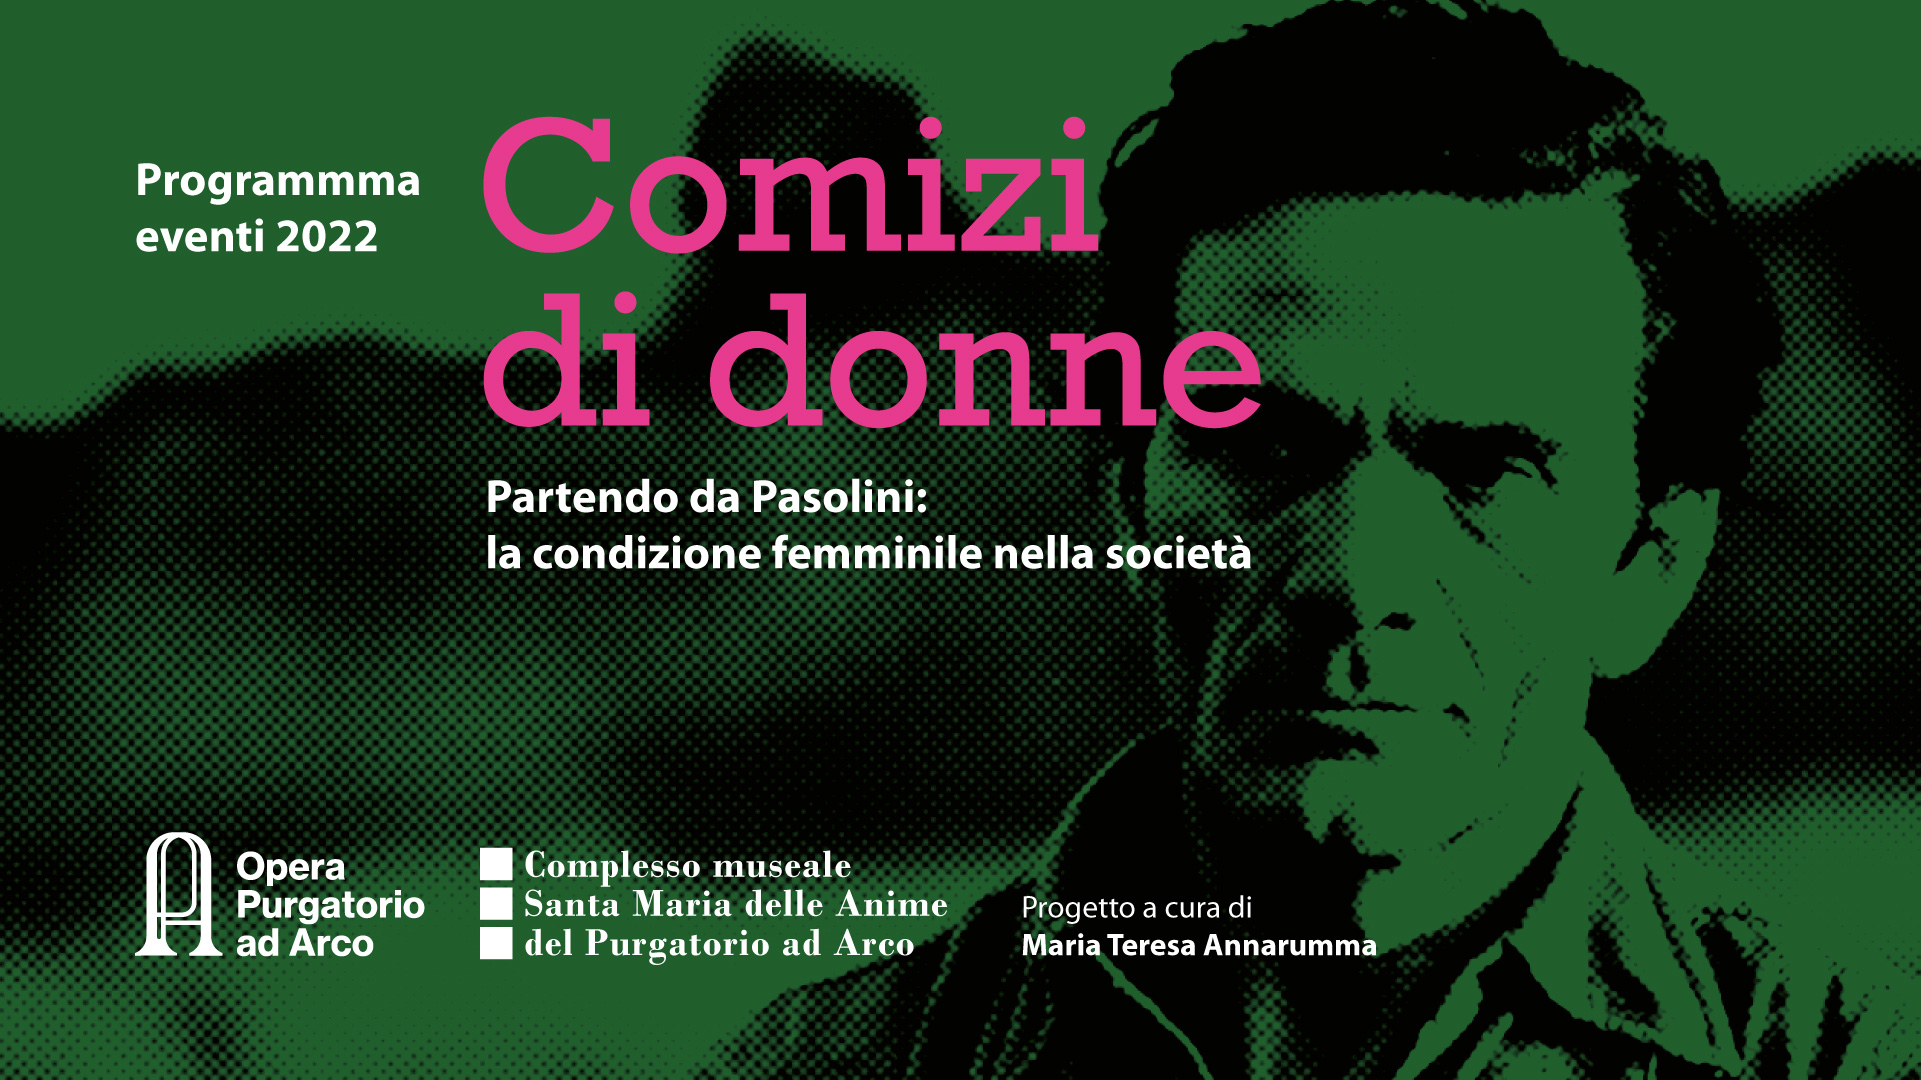 You are currently viewing COMIZI DI DONNE – 2022 program